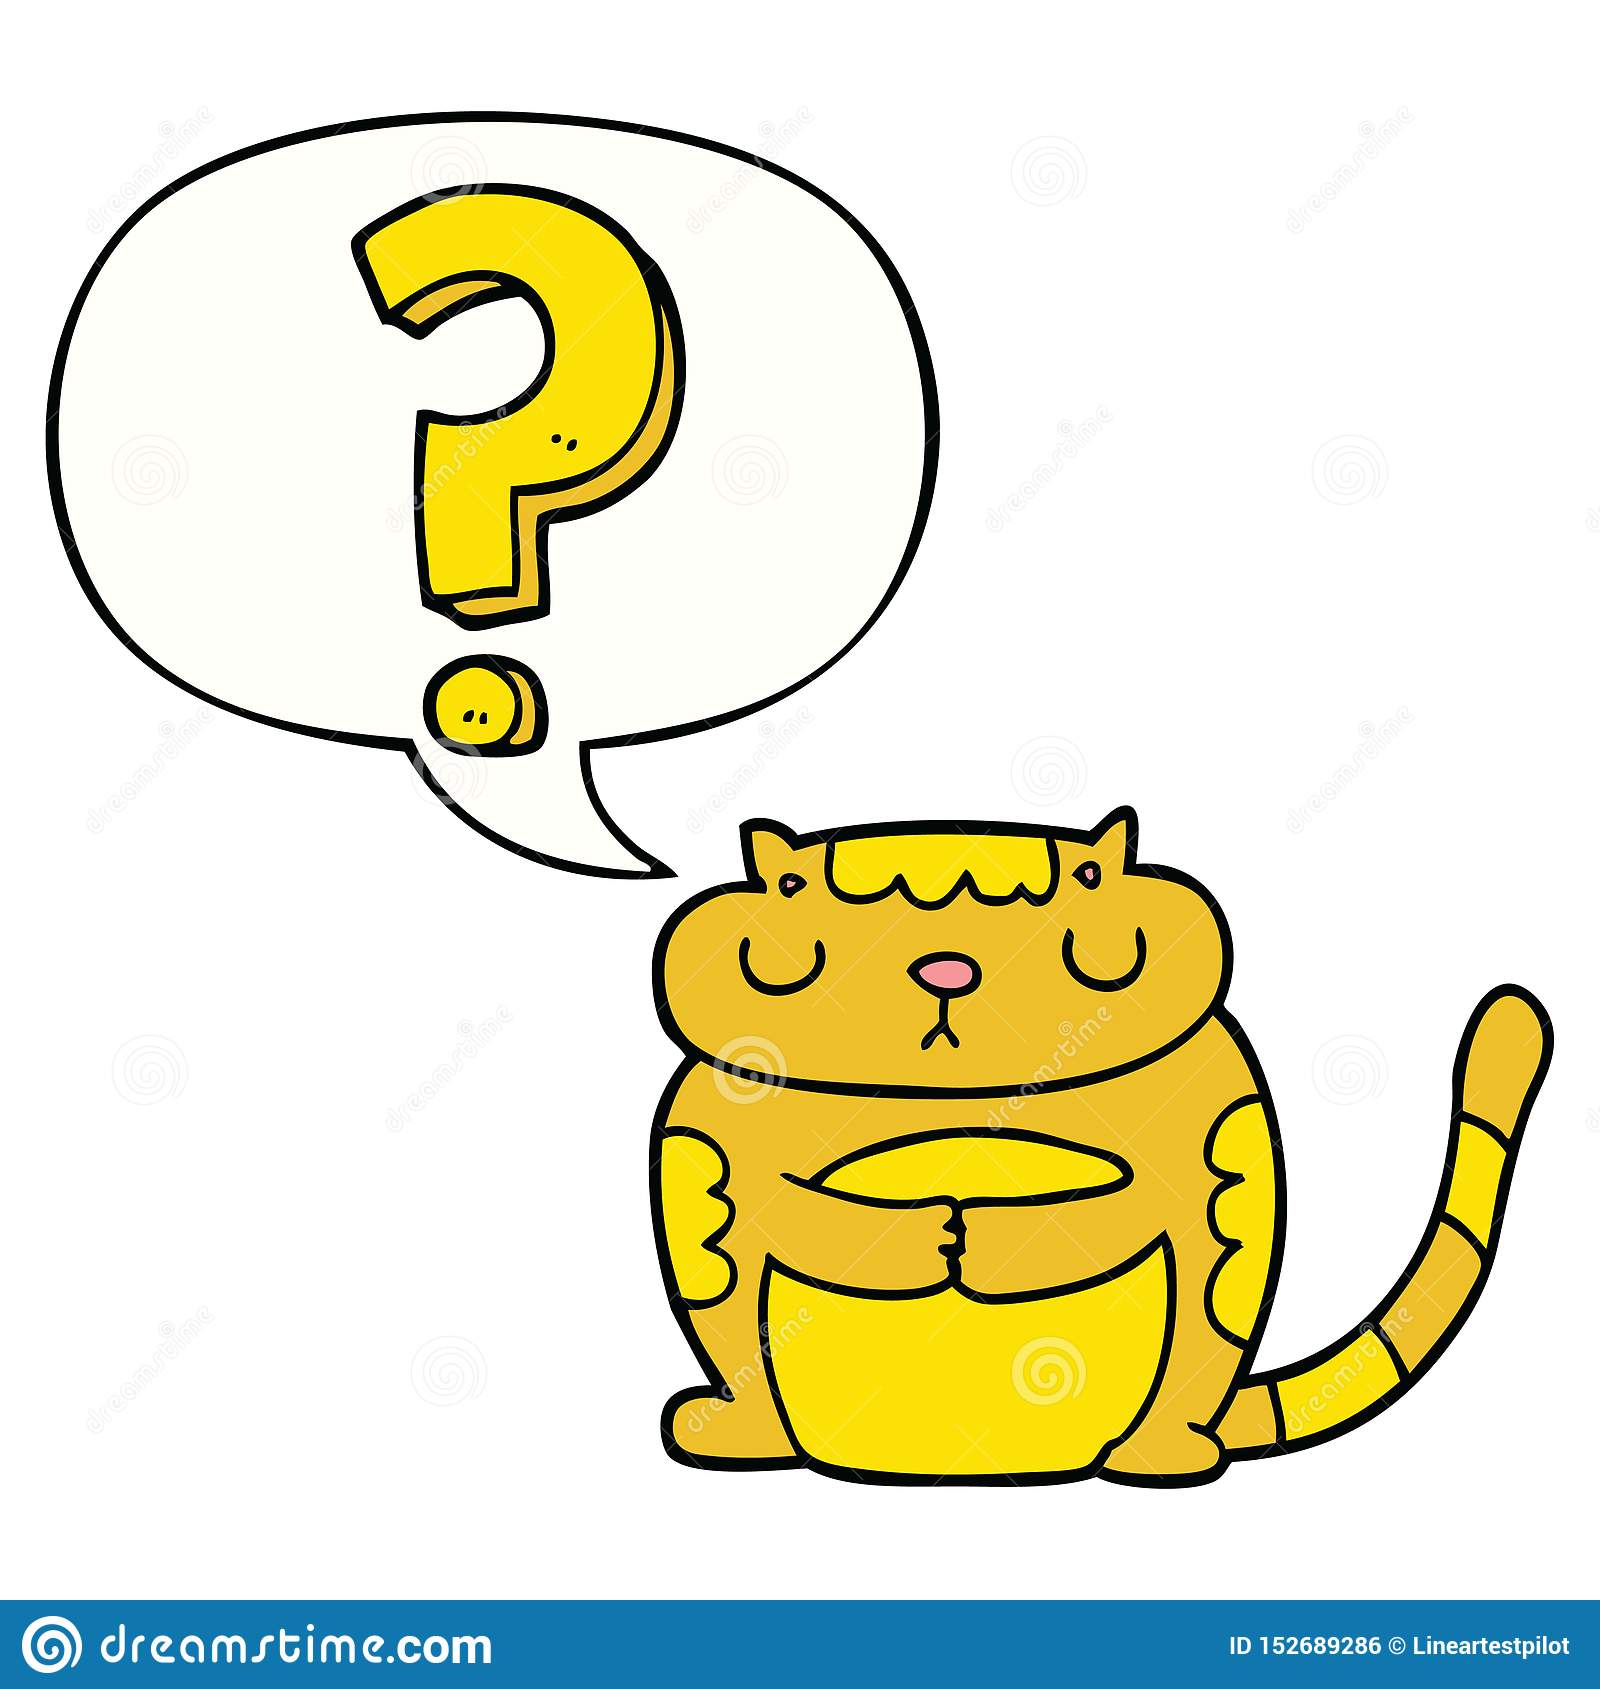 A Creative Cartoon Cat And Question Mark And Speech Bubble